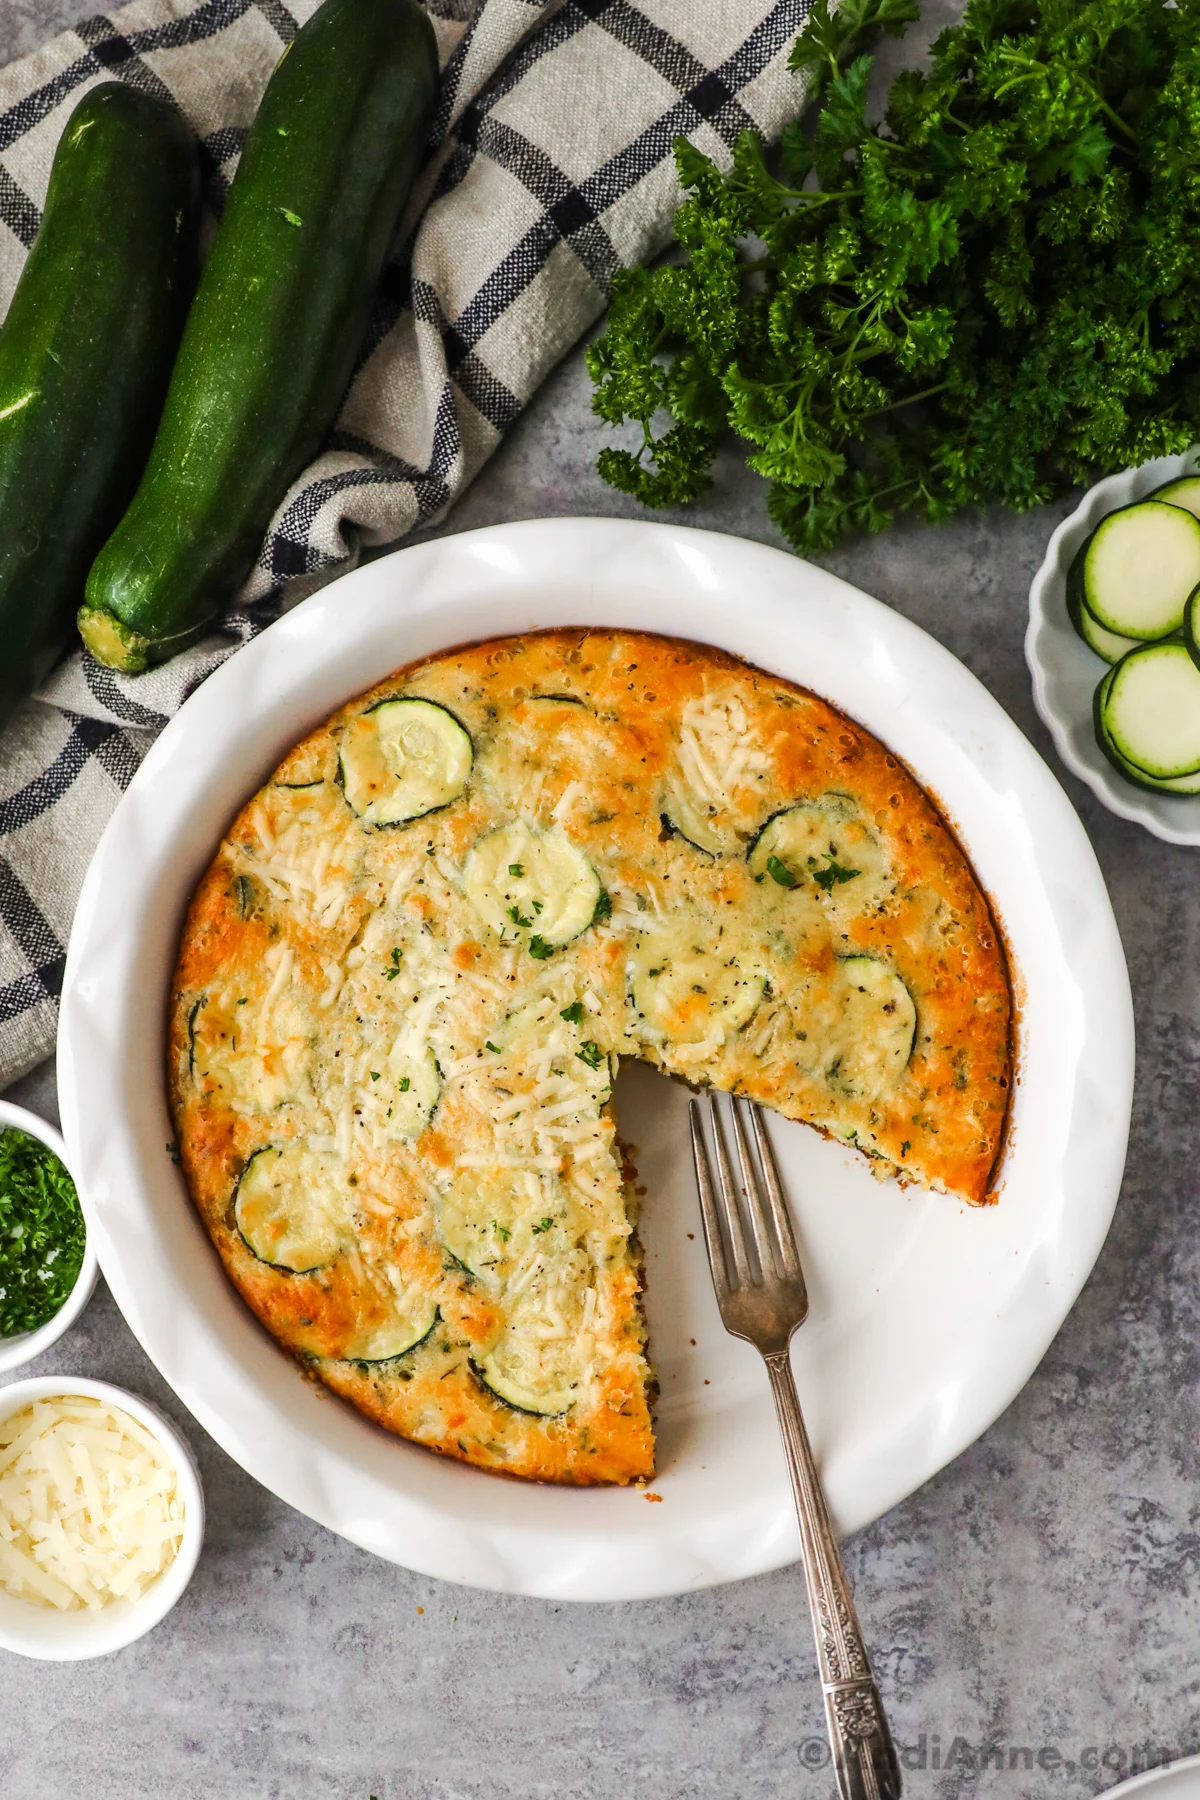 A slice cut out of zucchini pie with a fork, surrounded by bowls of ingredients, fresh zucchini and parmesan.